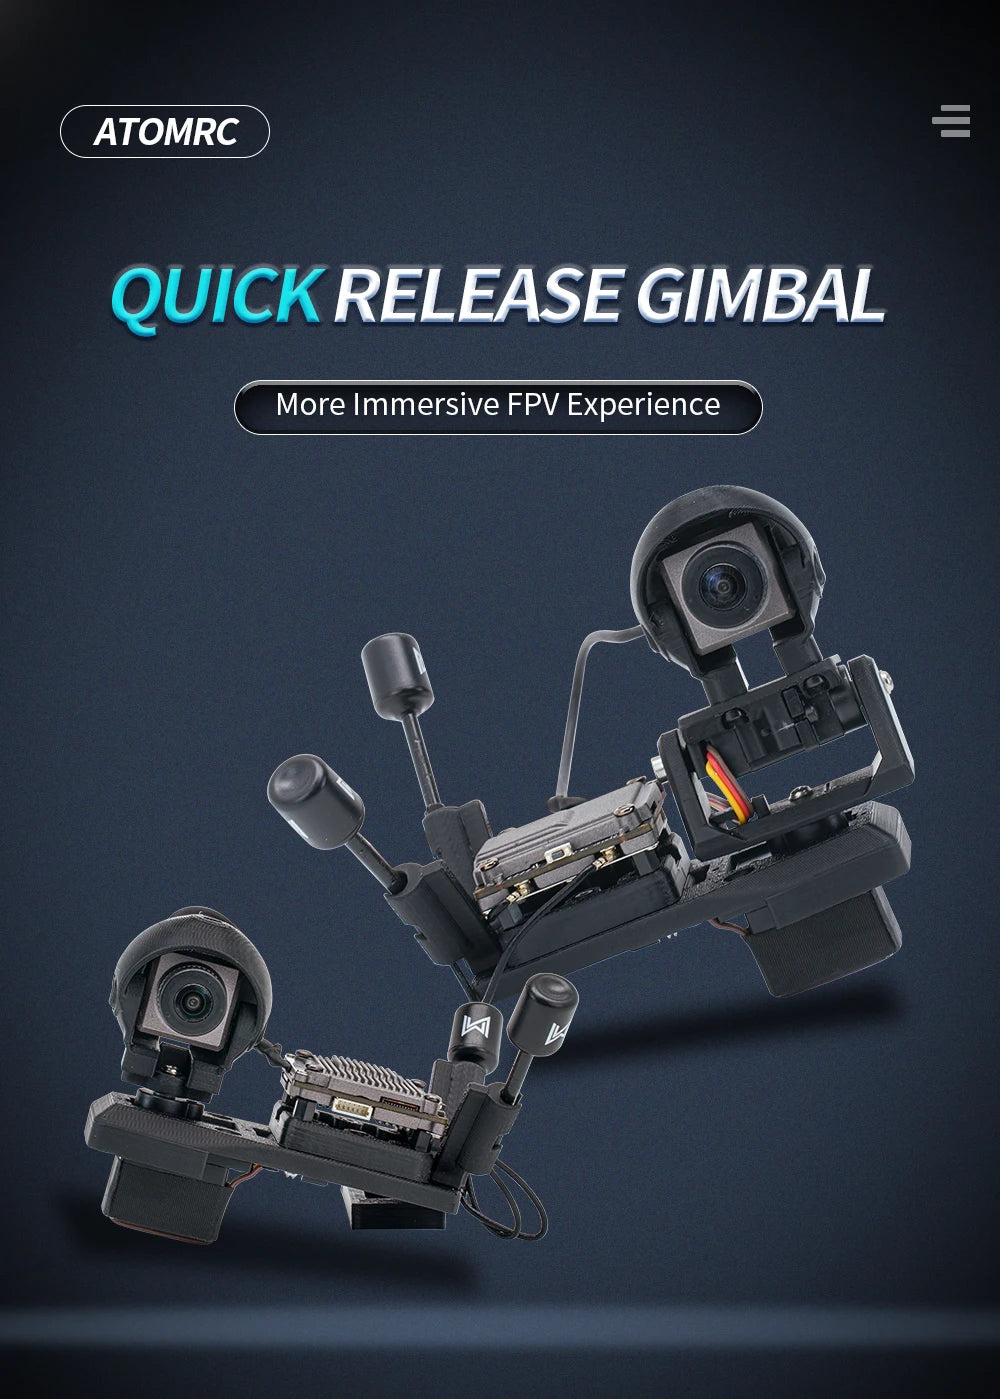 ATOMRC 1 Axis 2 Axis Gimbal, ATOMRC QUICK RELEASE GIMBAL More Immersive FP